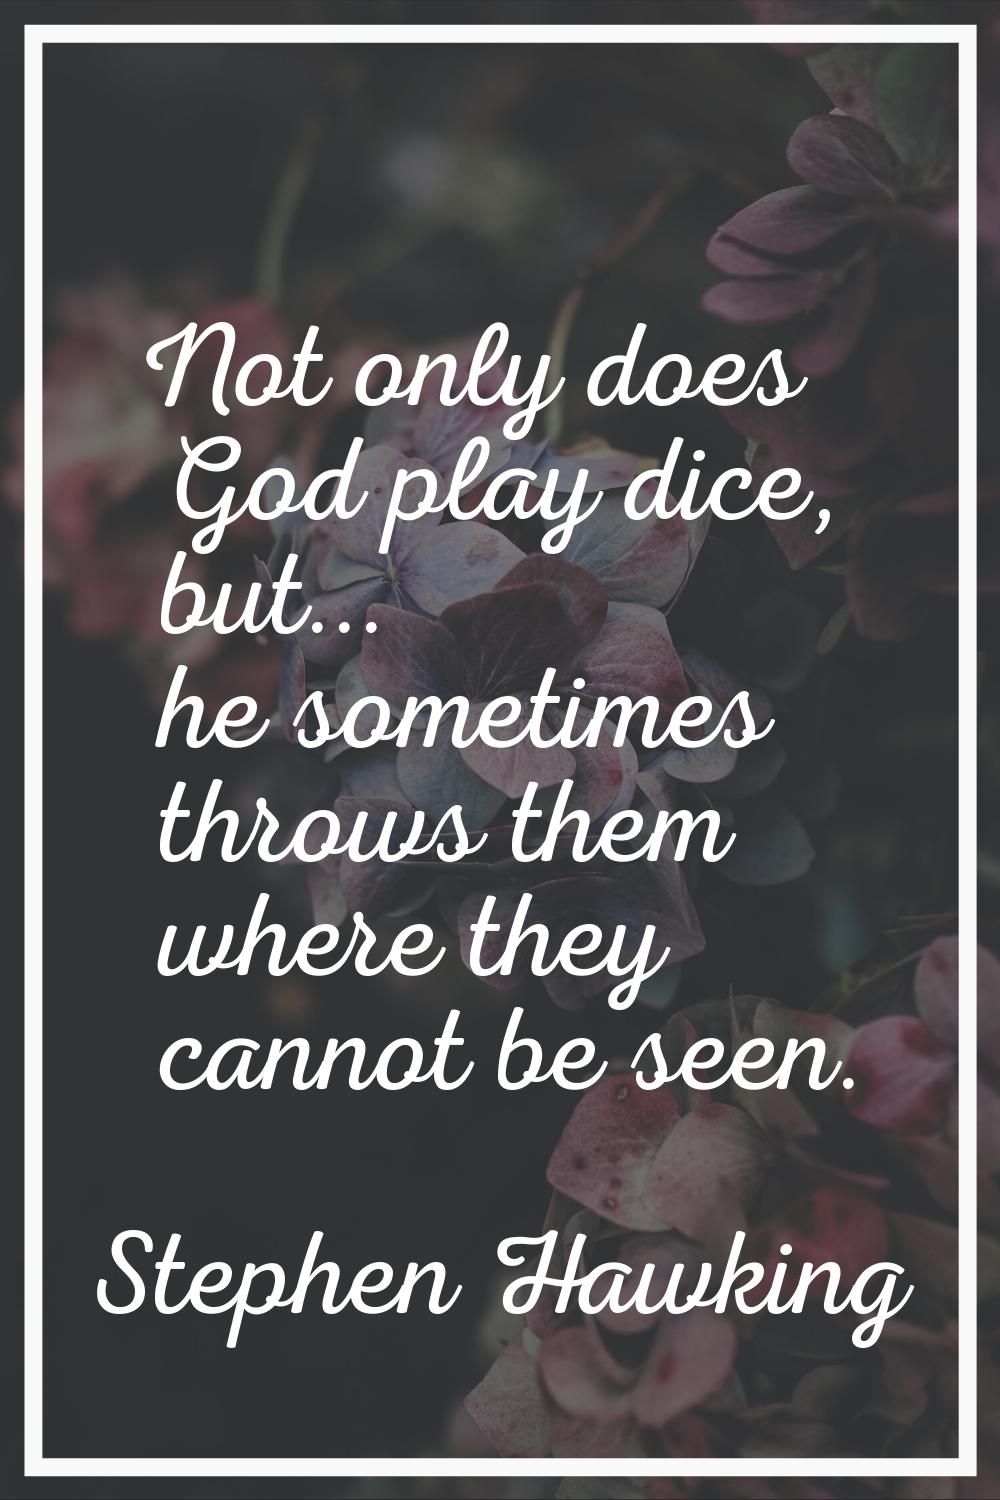 Not only does God play dice, but... he sometimes throws them where they cannot be seen.